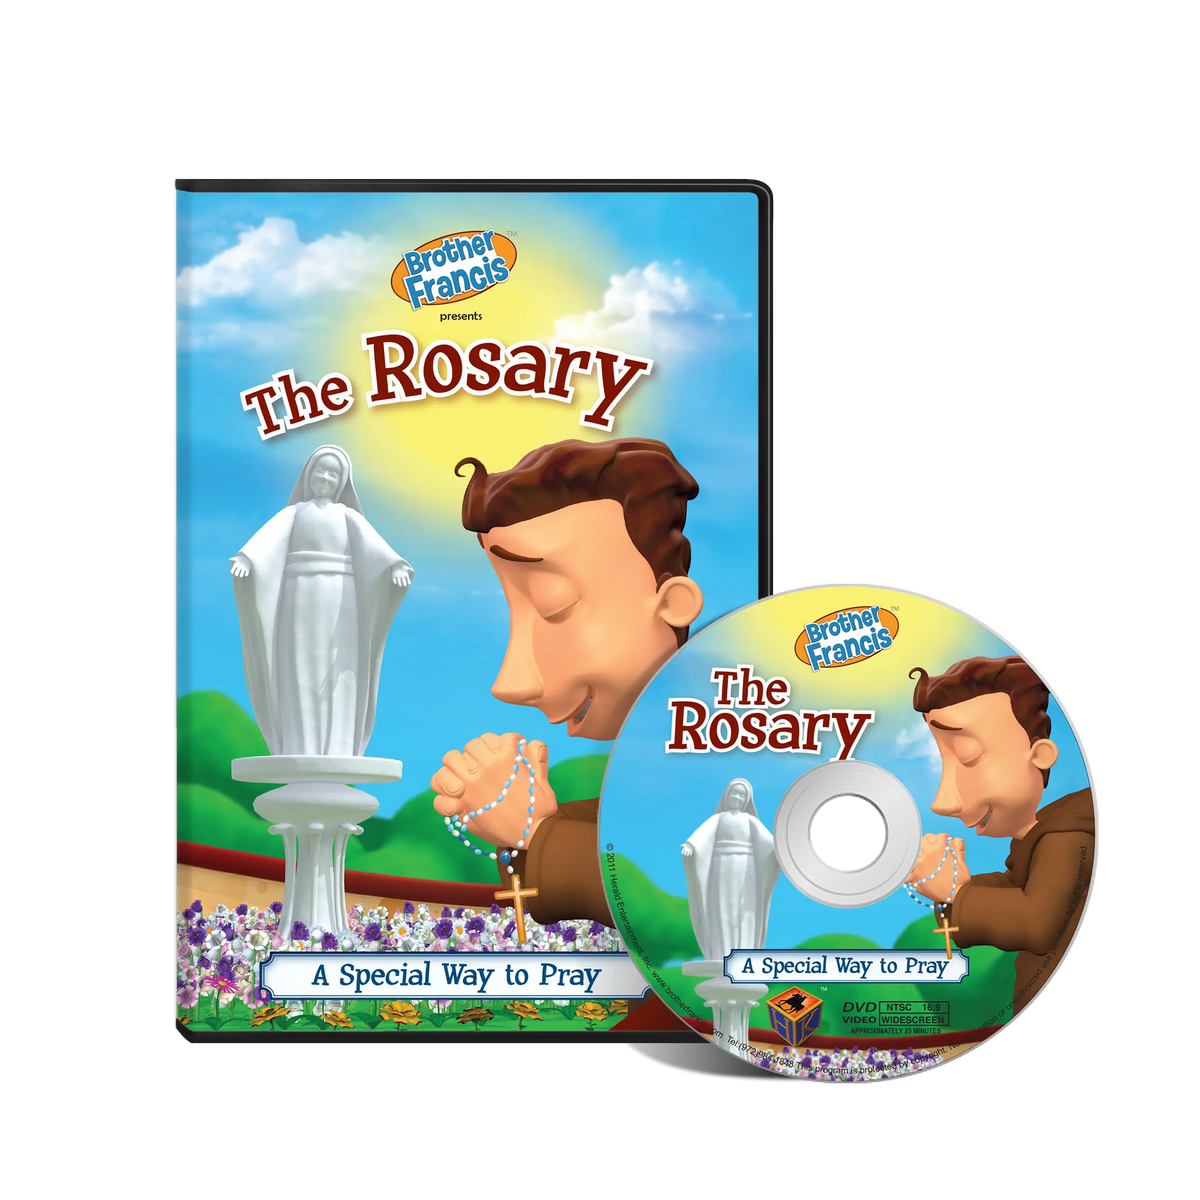 Brother Francis DVD Ep. 3: The Rosary